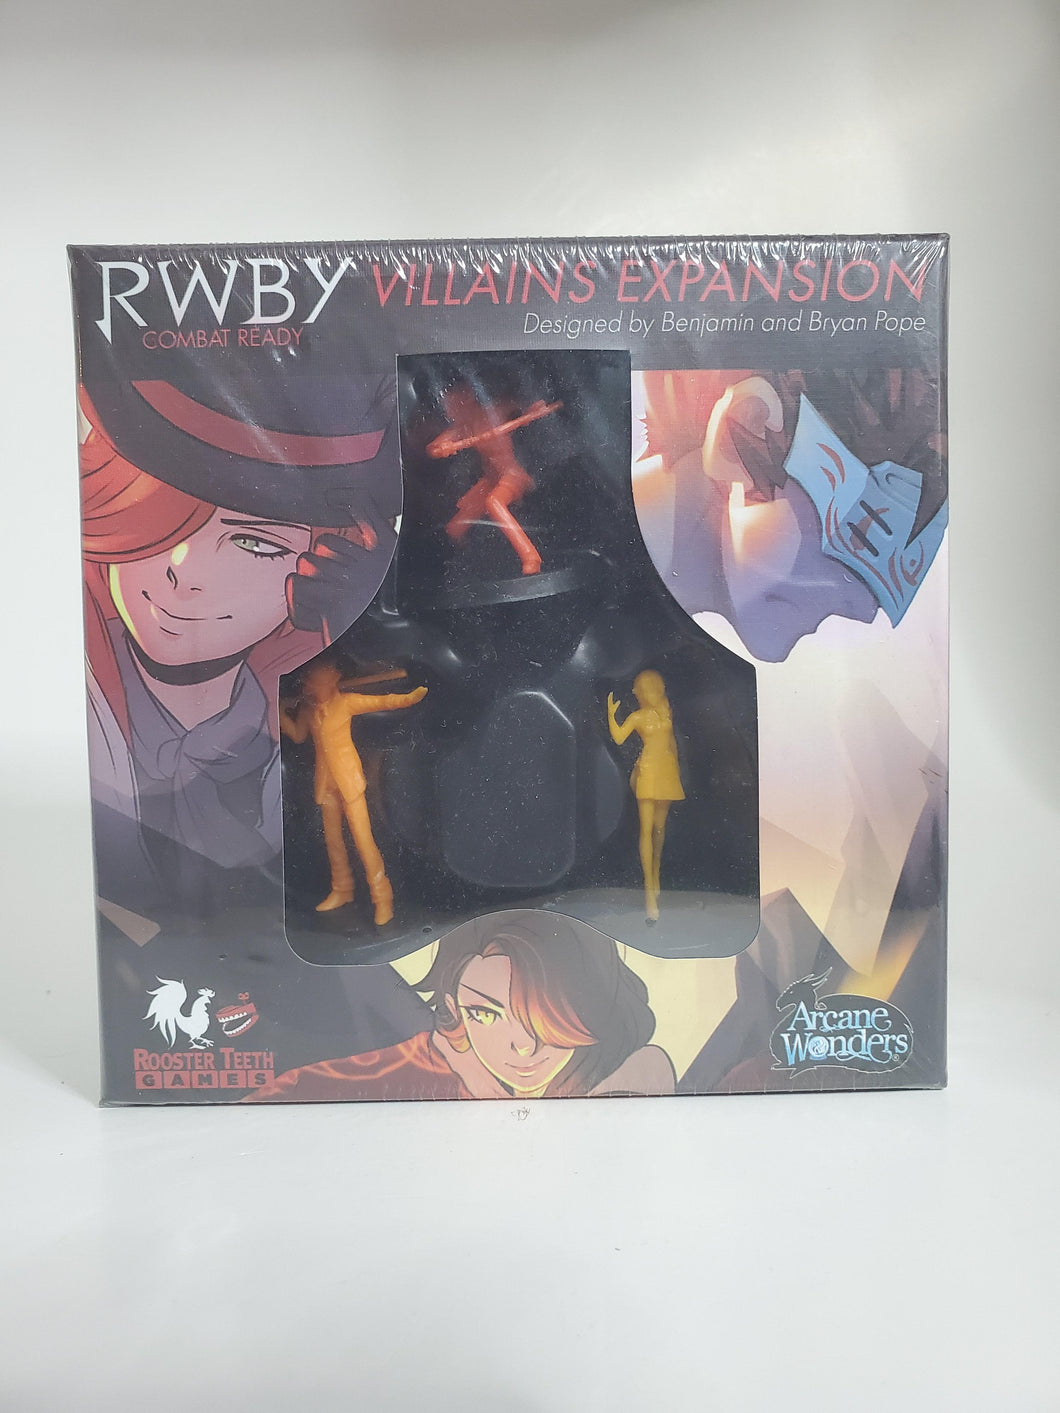 RWBY Villians Expansion by Rooster Teeth Games.